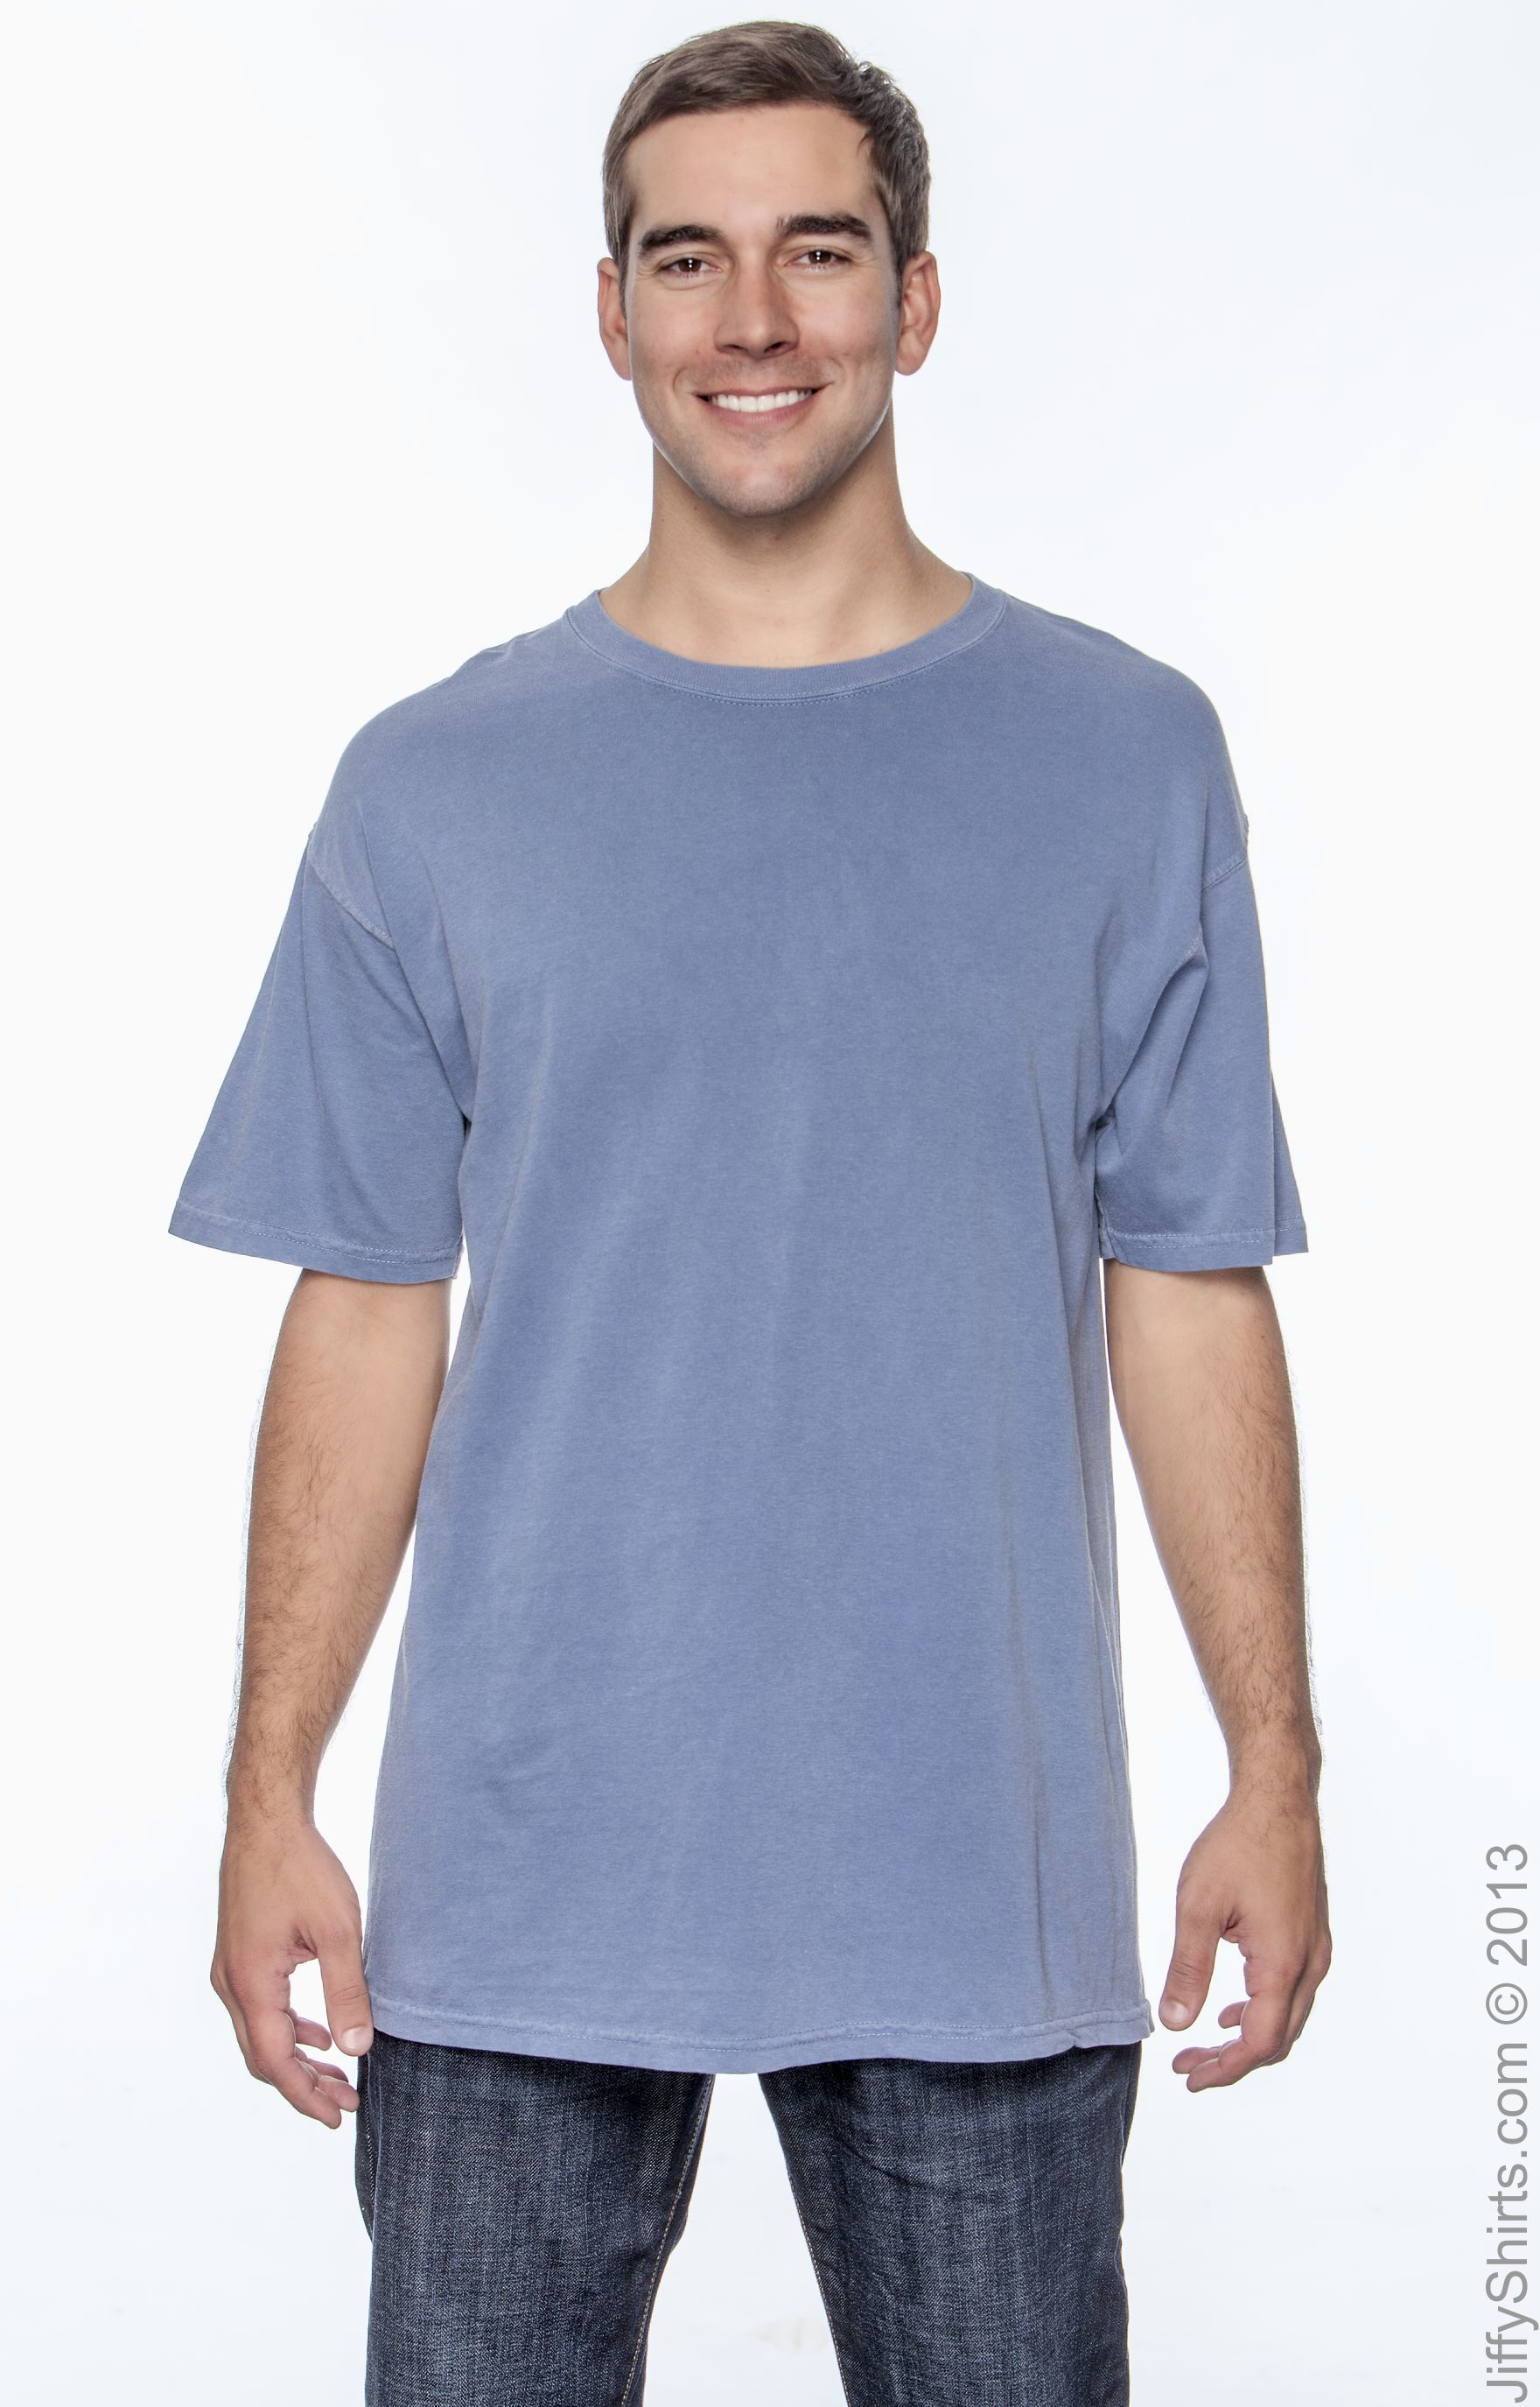 AnyBody Cozy Knit Washed Tee with Seam Detail - QVC.com